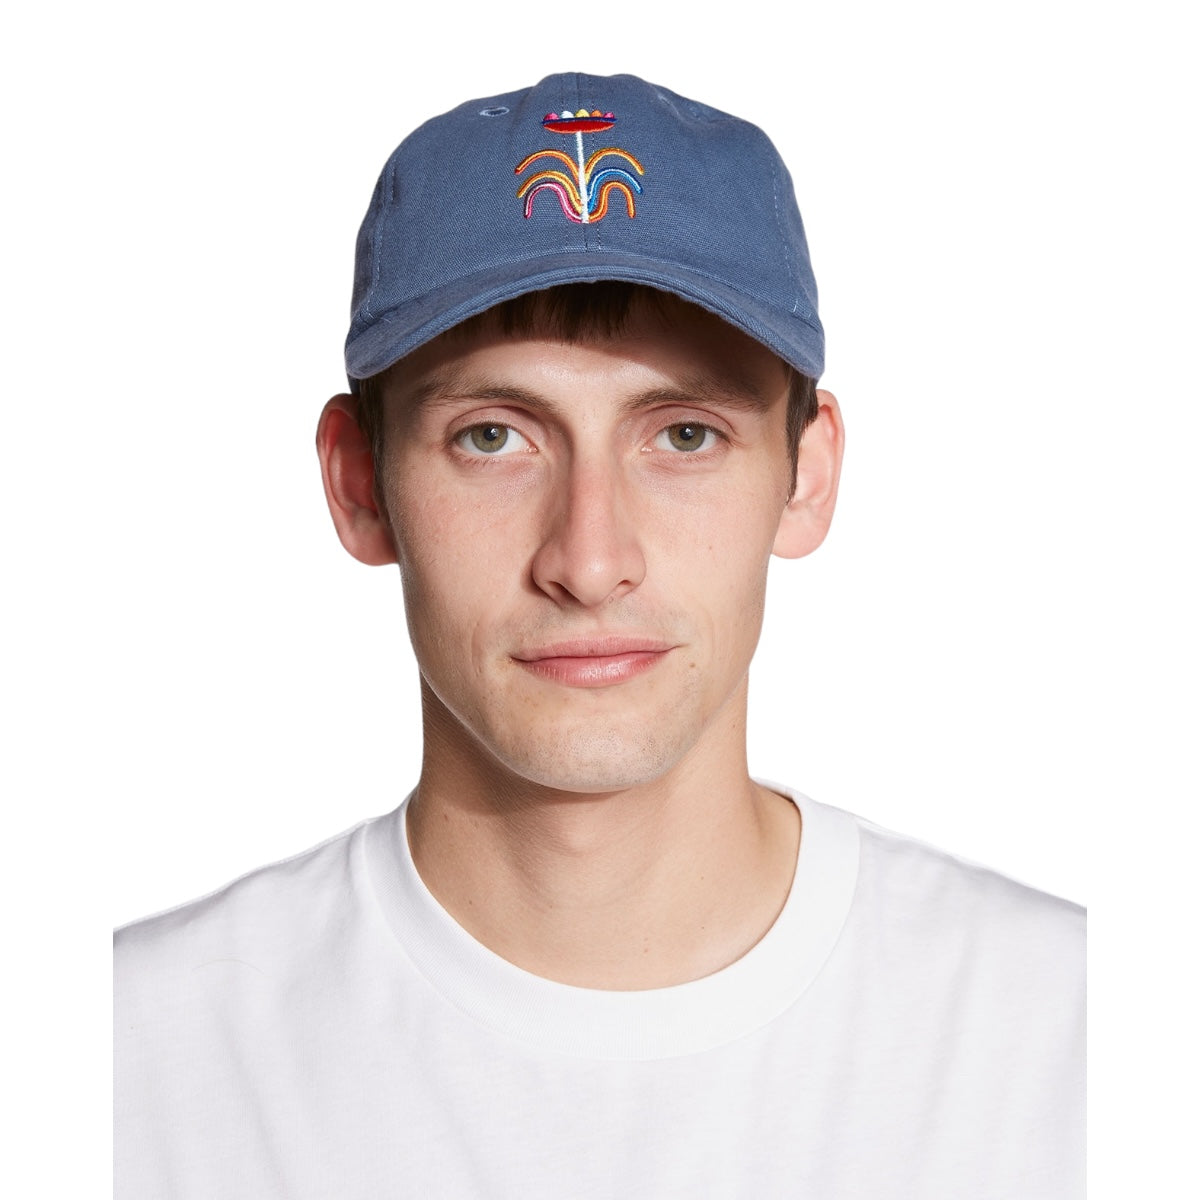 Olow Casquette Six Panel tulbend